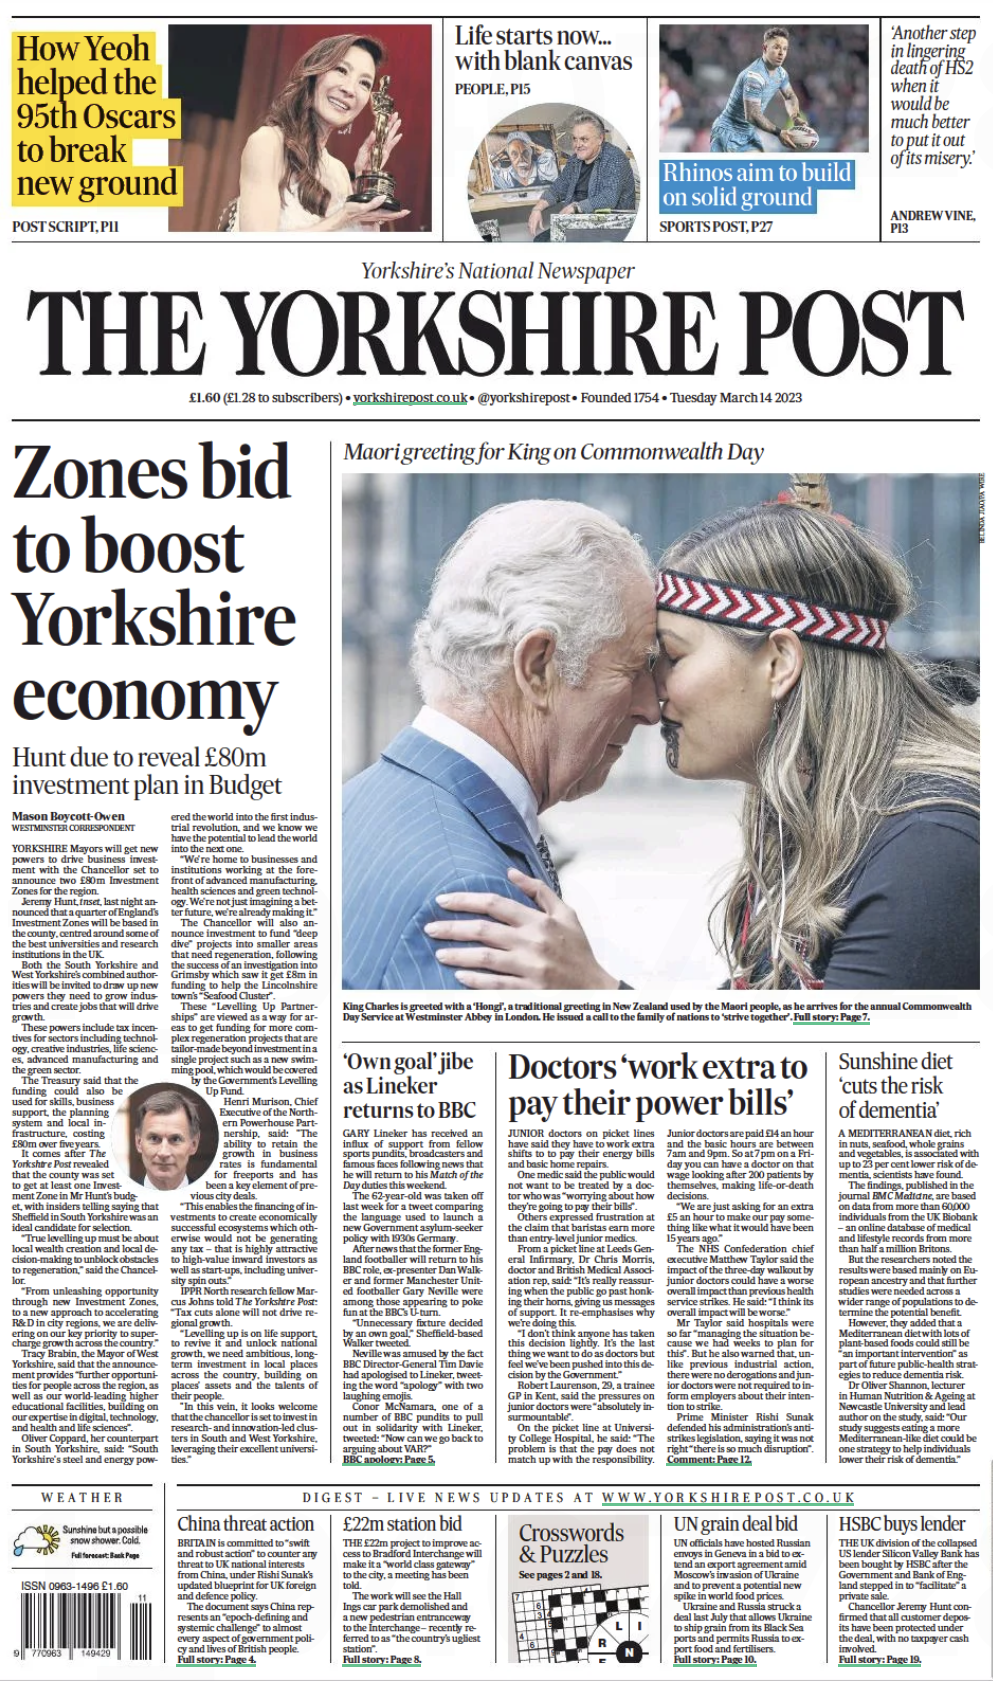 The Yorkshire Post - Mar 2023